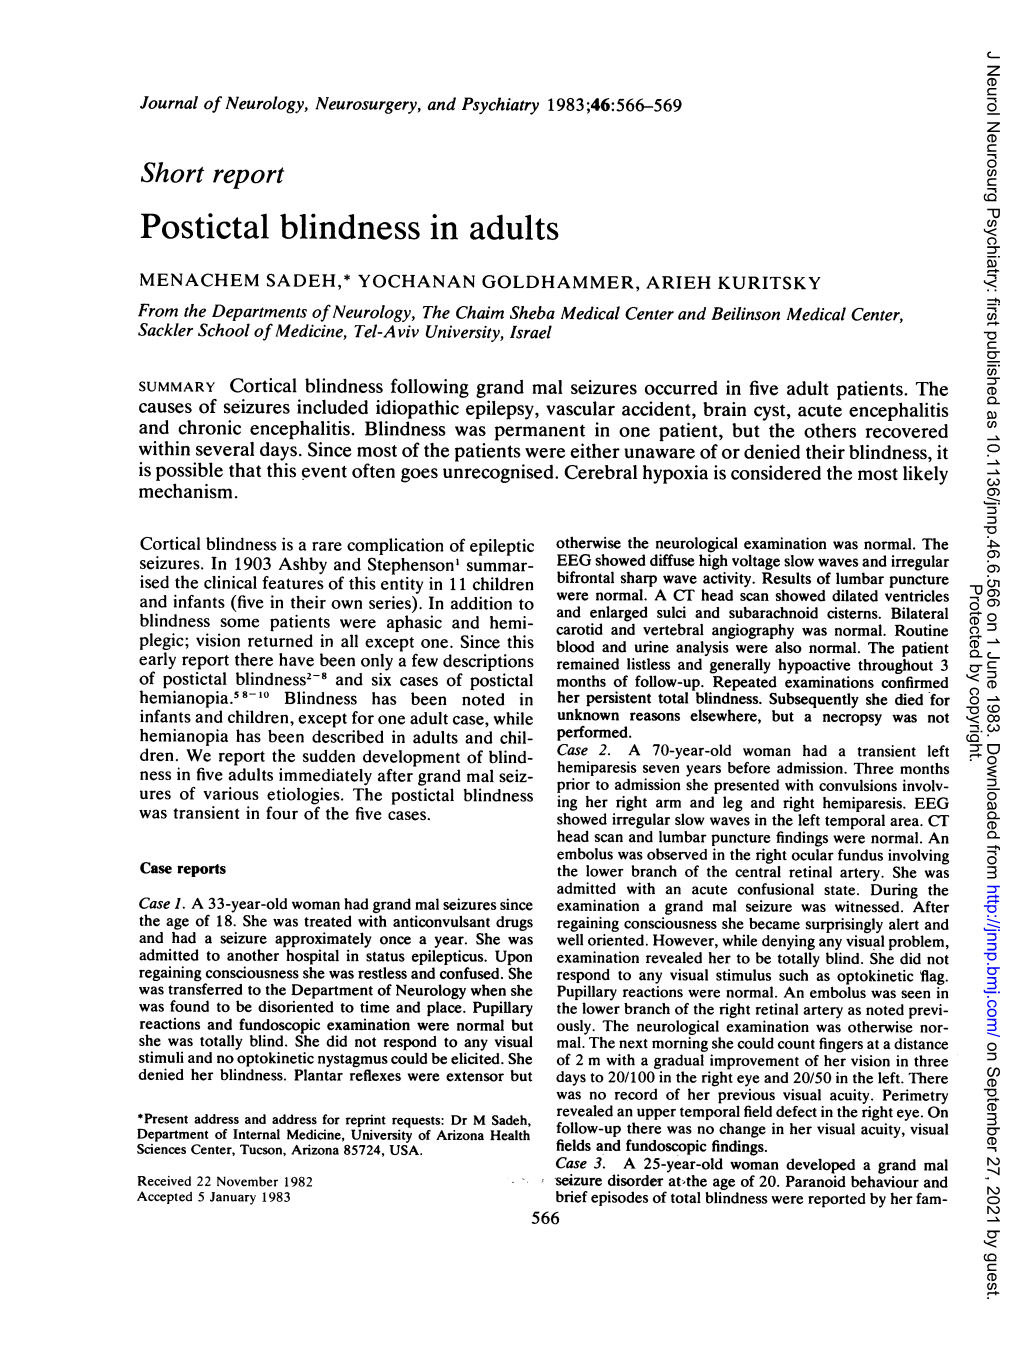 Postictal Blindness in Adults